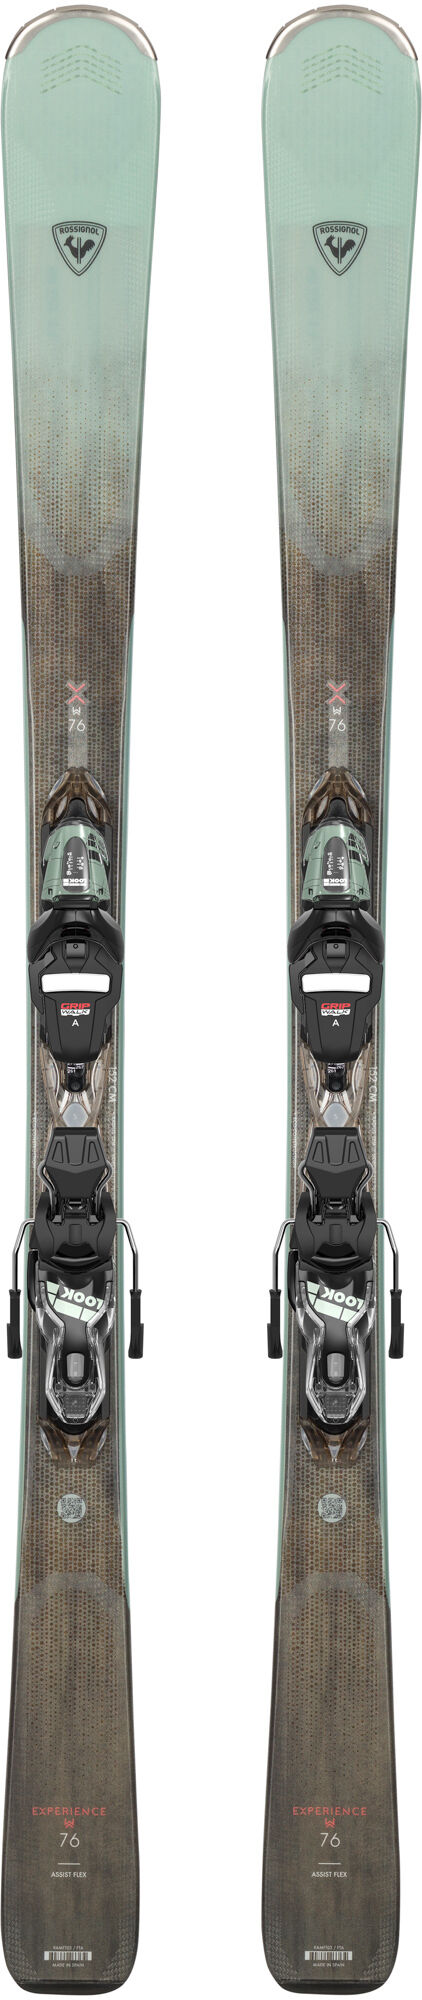 EXPERIENCE W 76 XPRESS | ALL MOUNTAIN | Rossignol